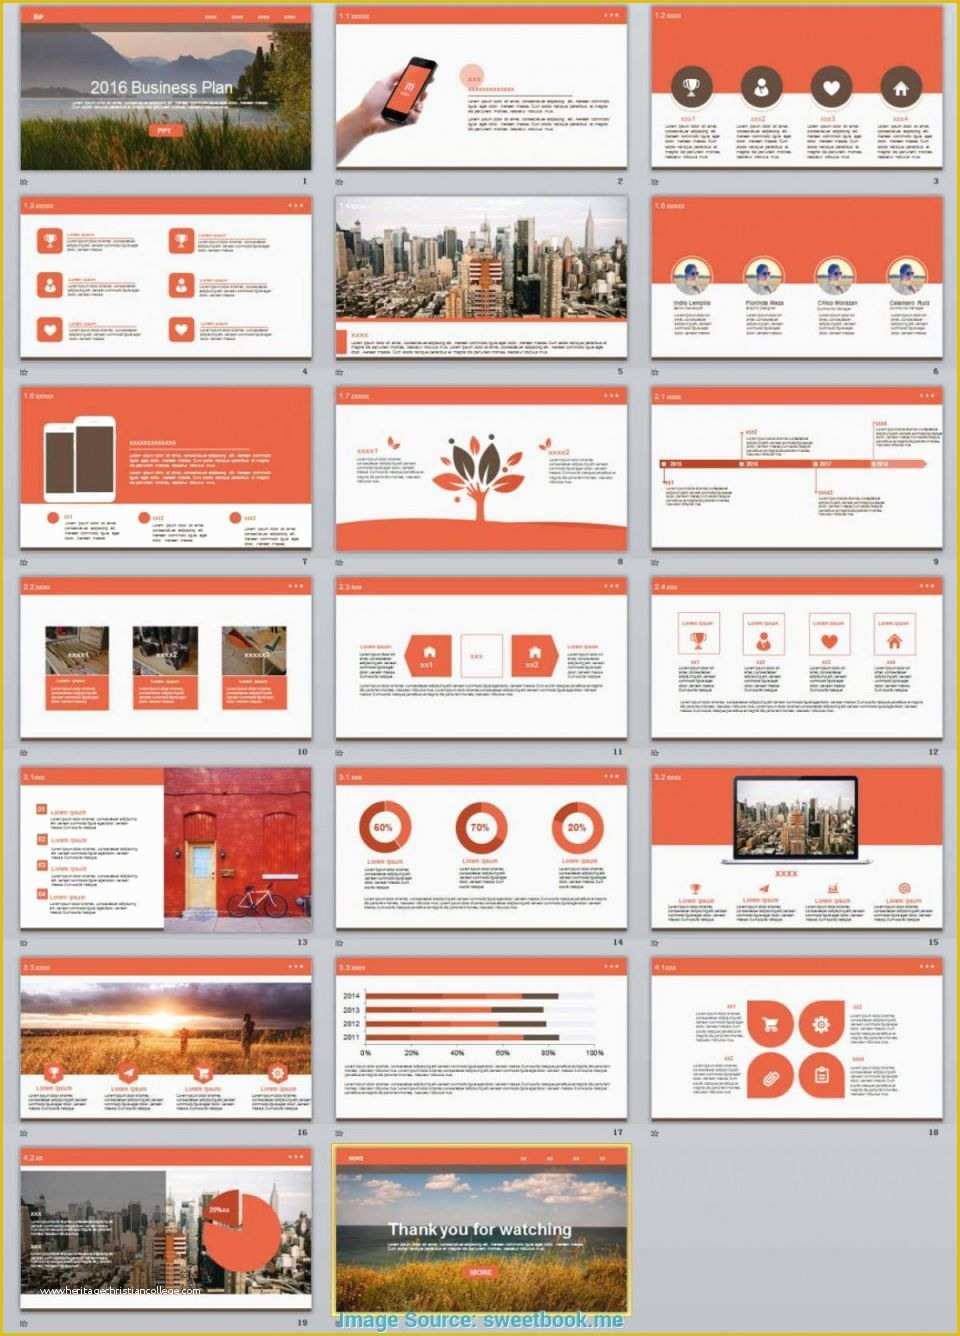 Modern Business Plan Powerpoint Template Free Of Brand New Business Plan Presentation Sample Hy42